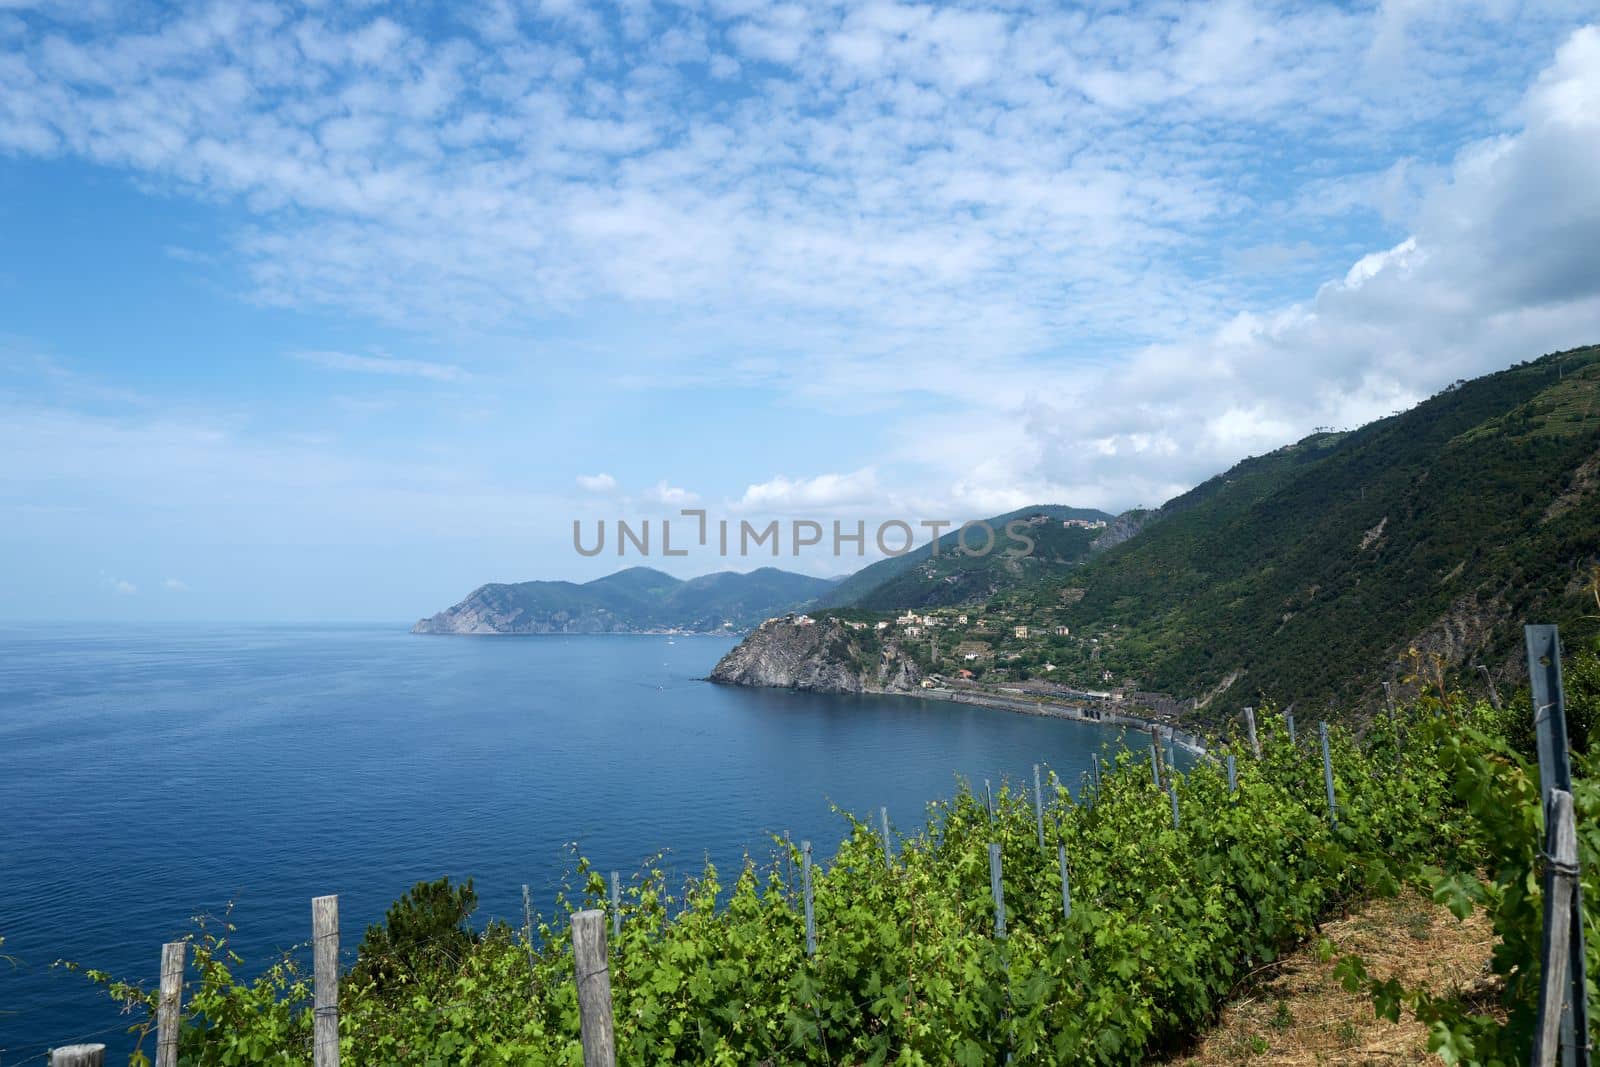 A vineyard in the Cinque Terre region by Pammy1140